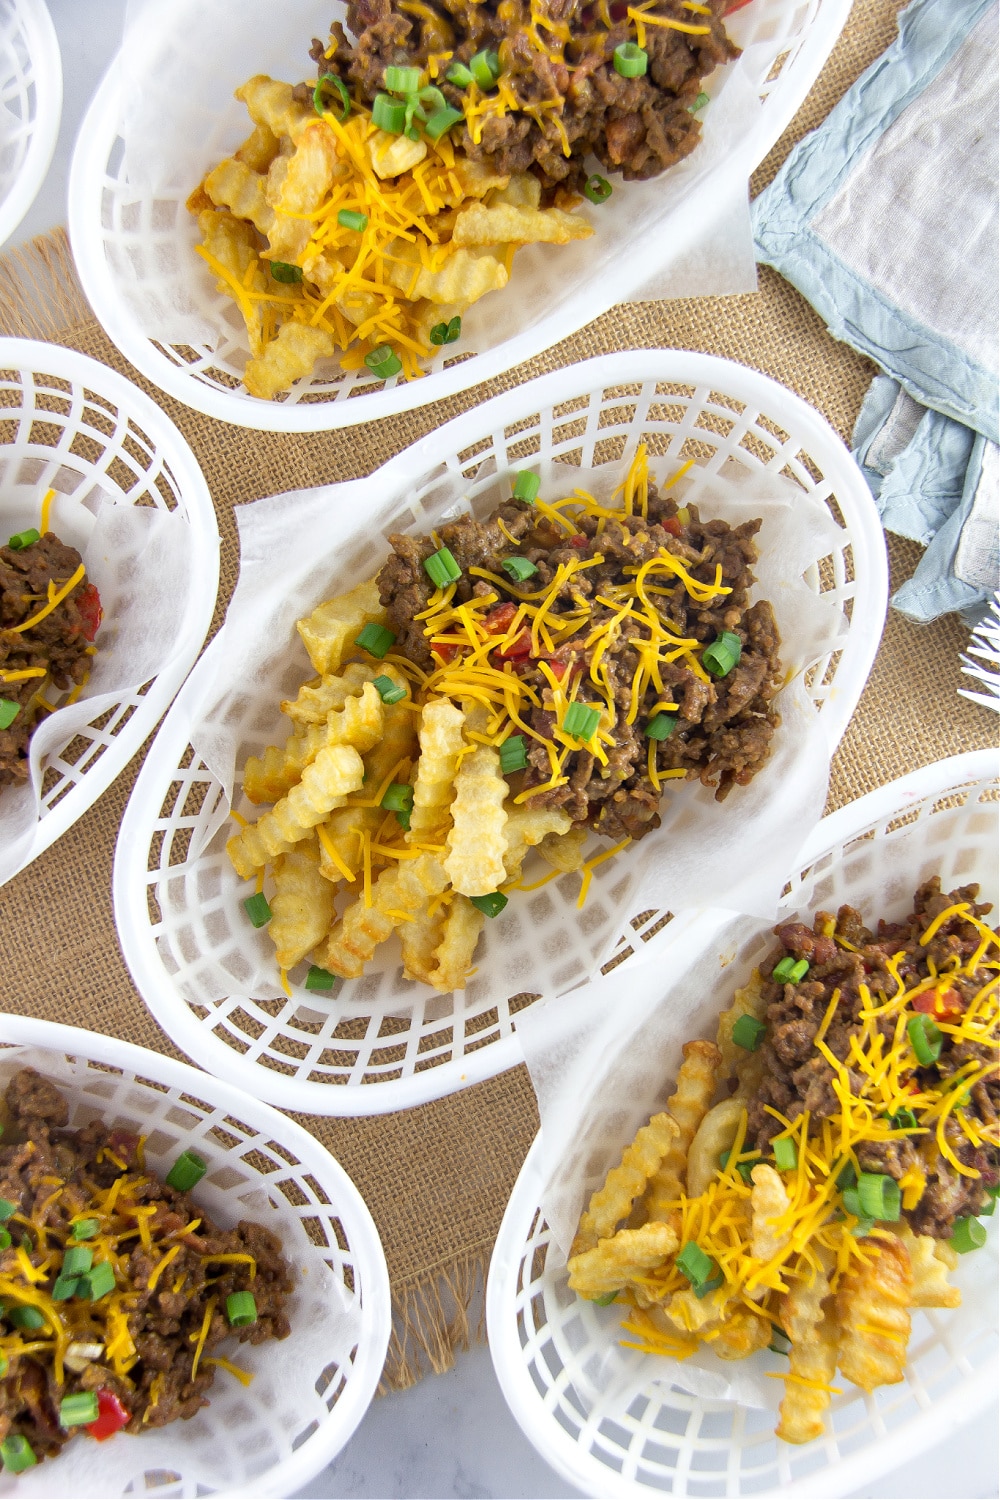 individual serving baskets filled with loaded sloppy joe fries.